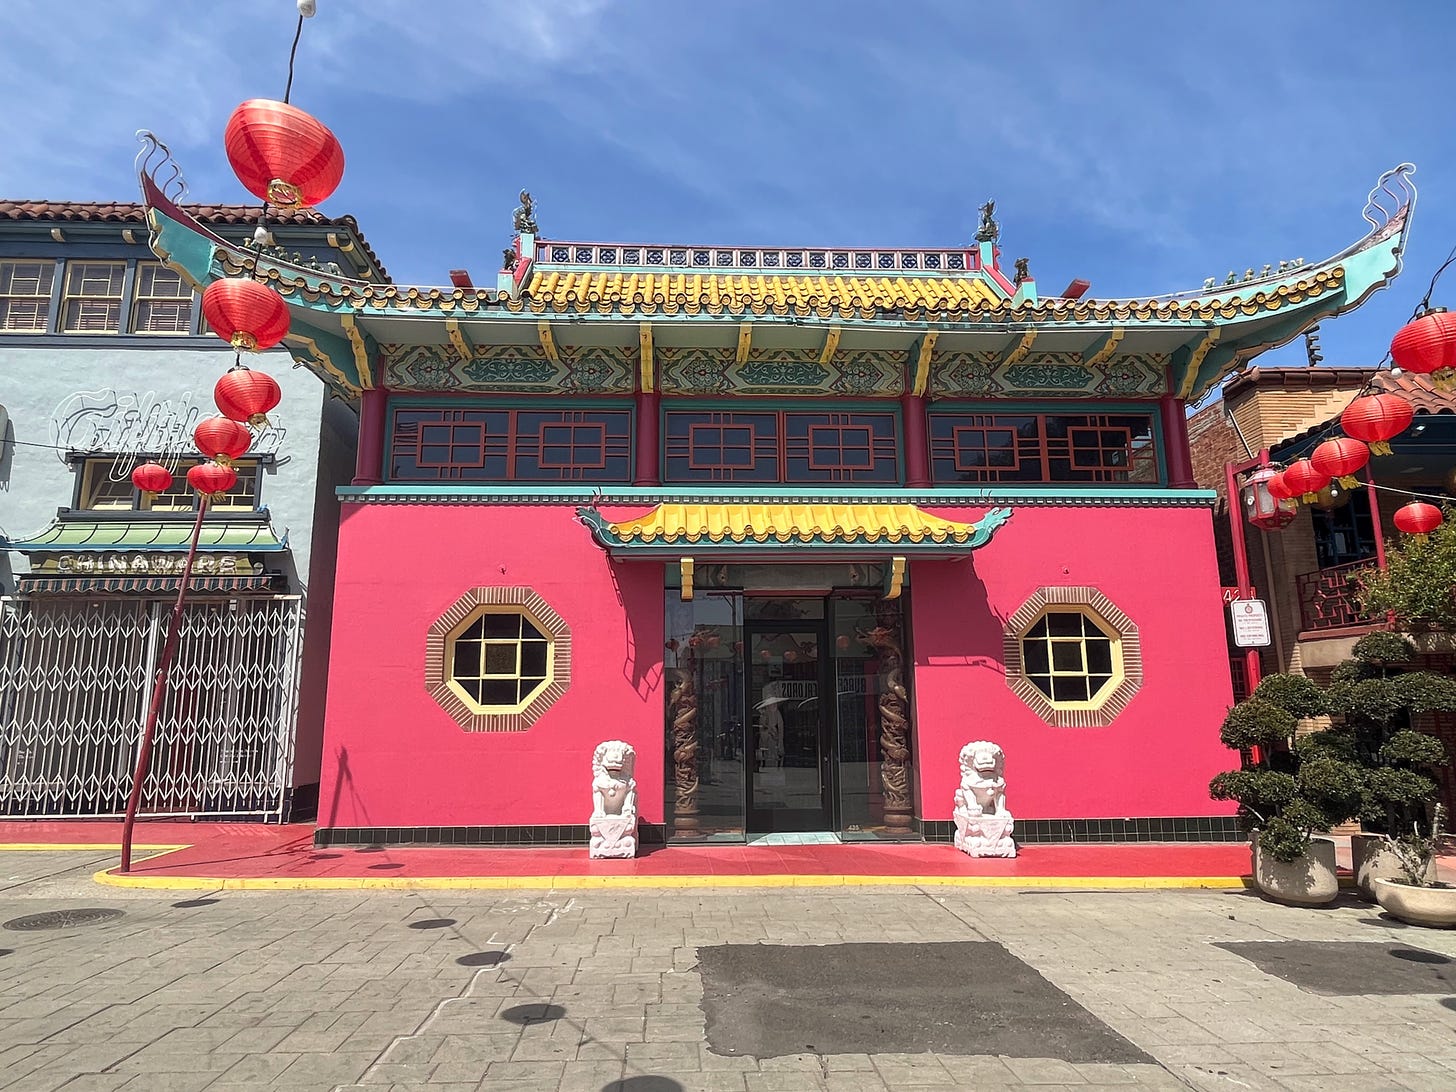 View of pink single story building decorated in the vintage Chinese style.